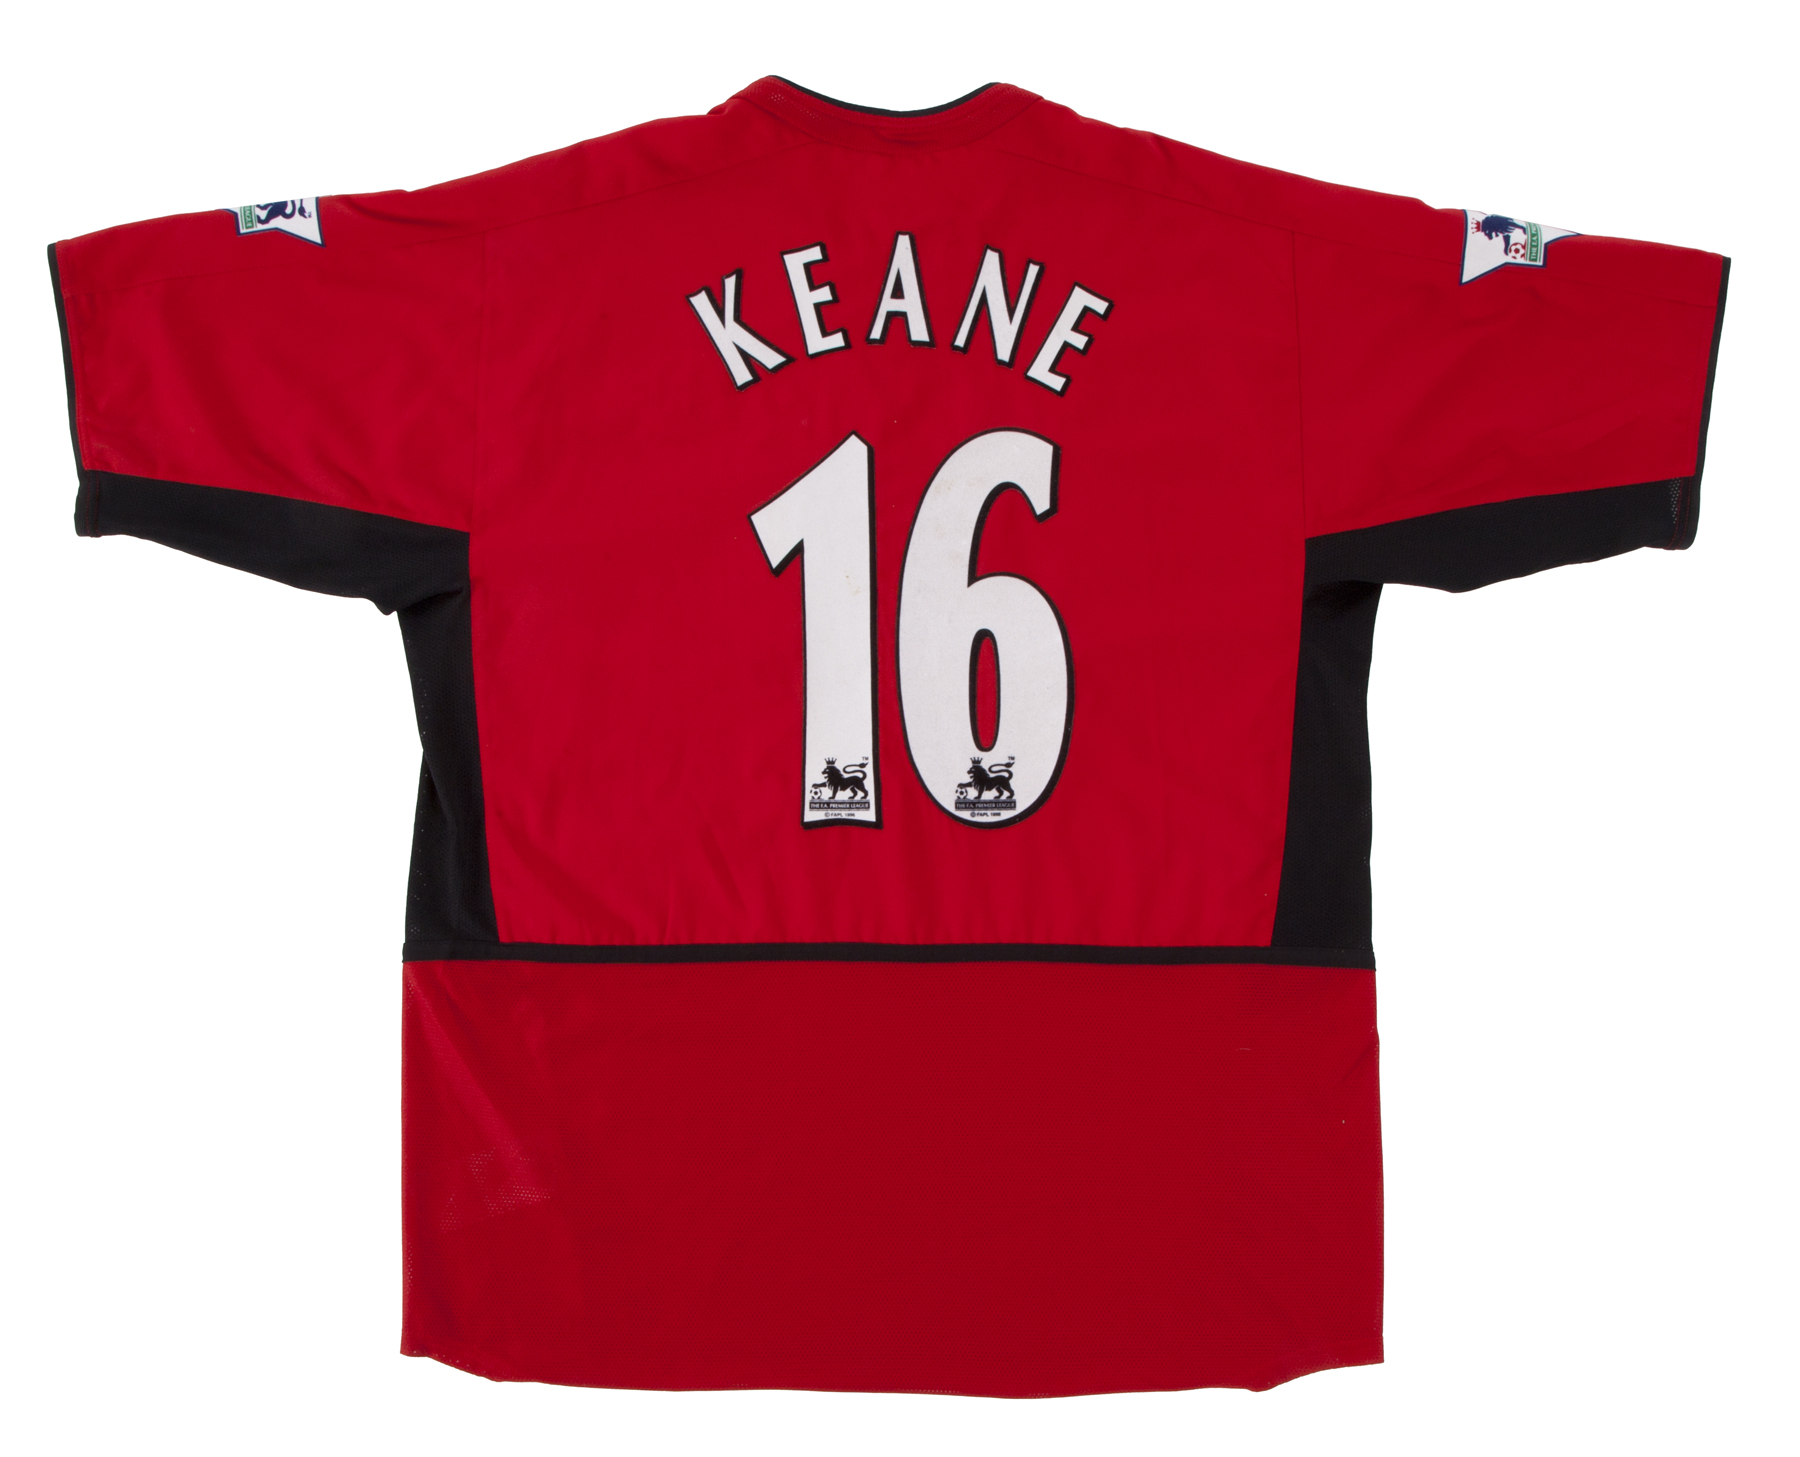 ROY KEANE 2002 MANCHESTER UNITED TEAM ISSUED JERSEY - Image 2 of 3